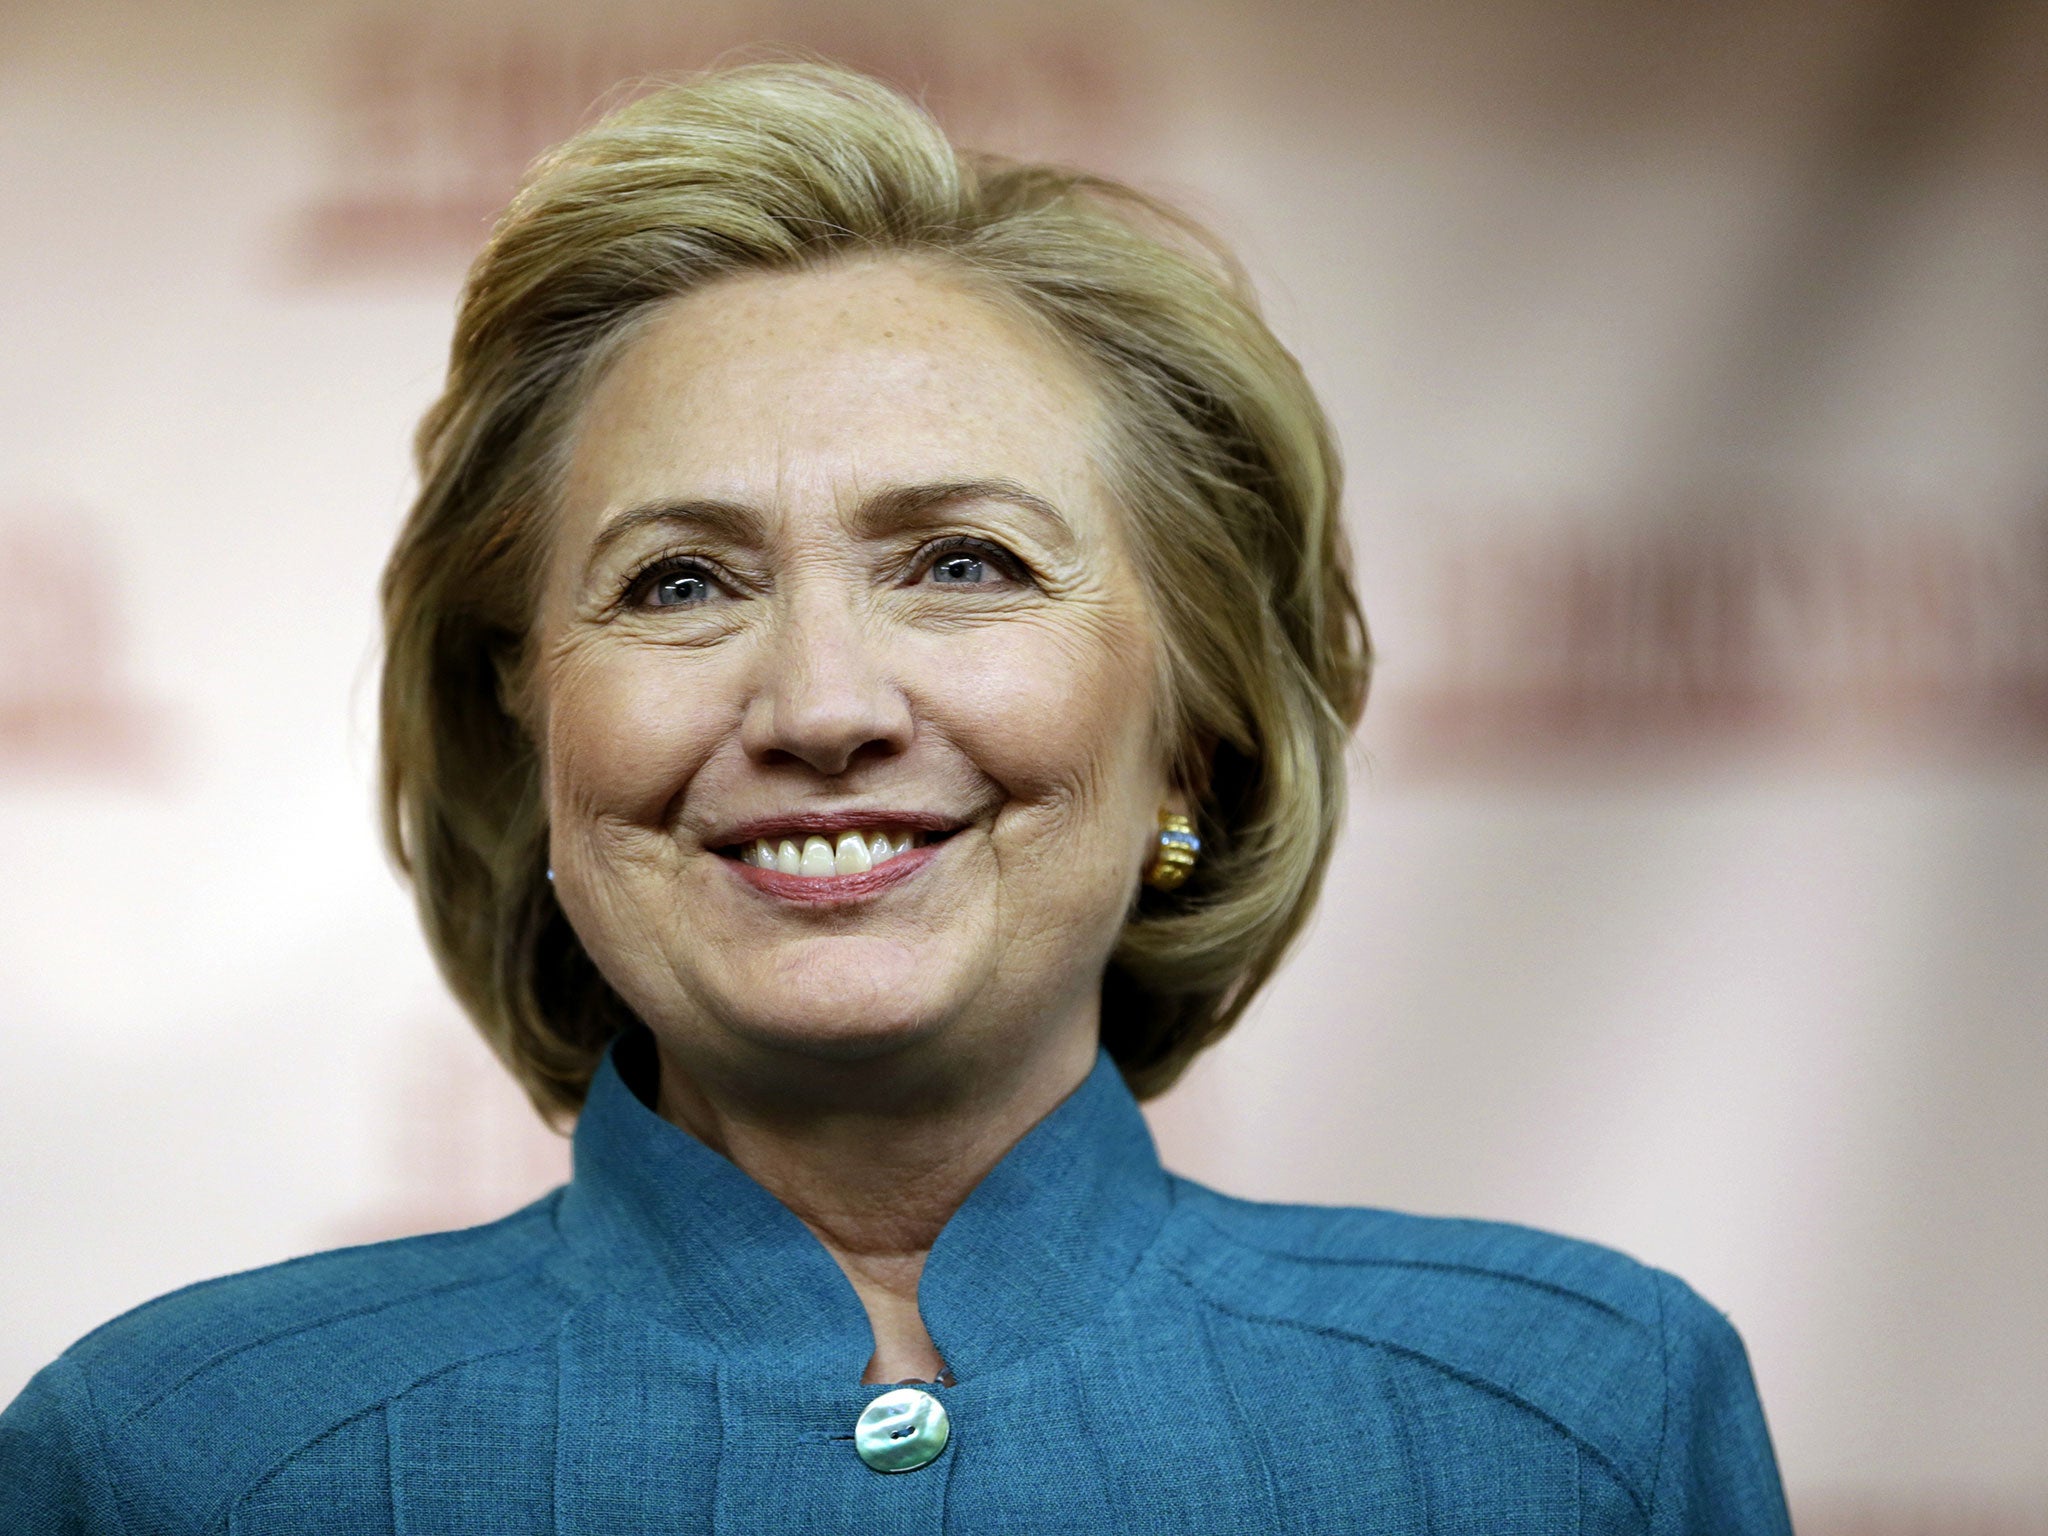 It will likely be Hillary Clinton’s last drive for power, as she is now 67 (